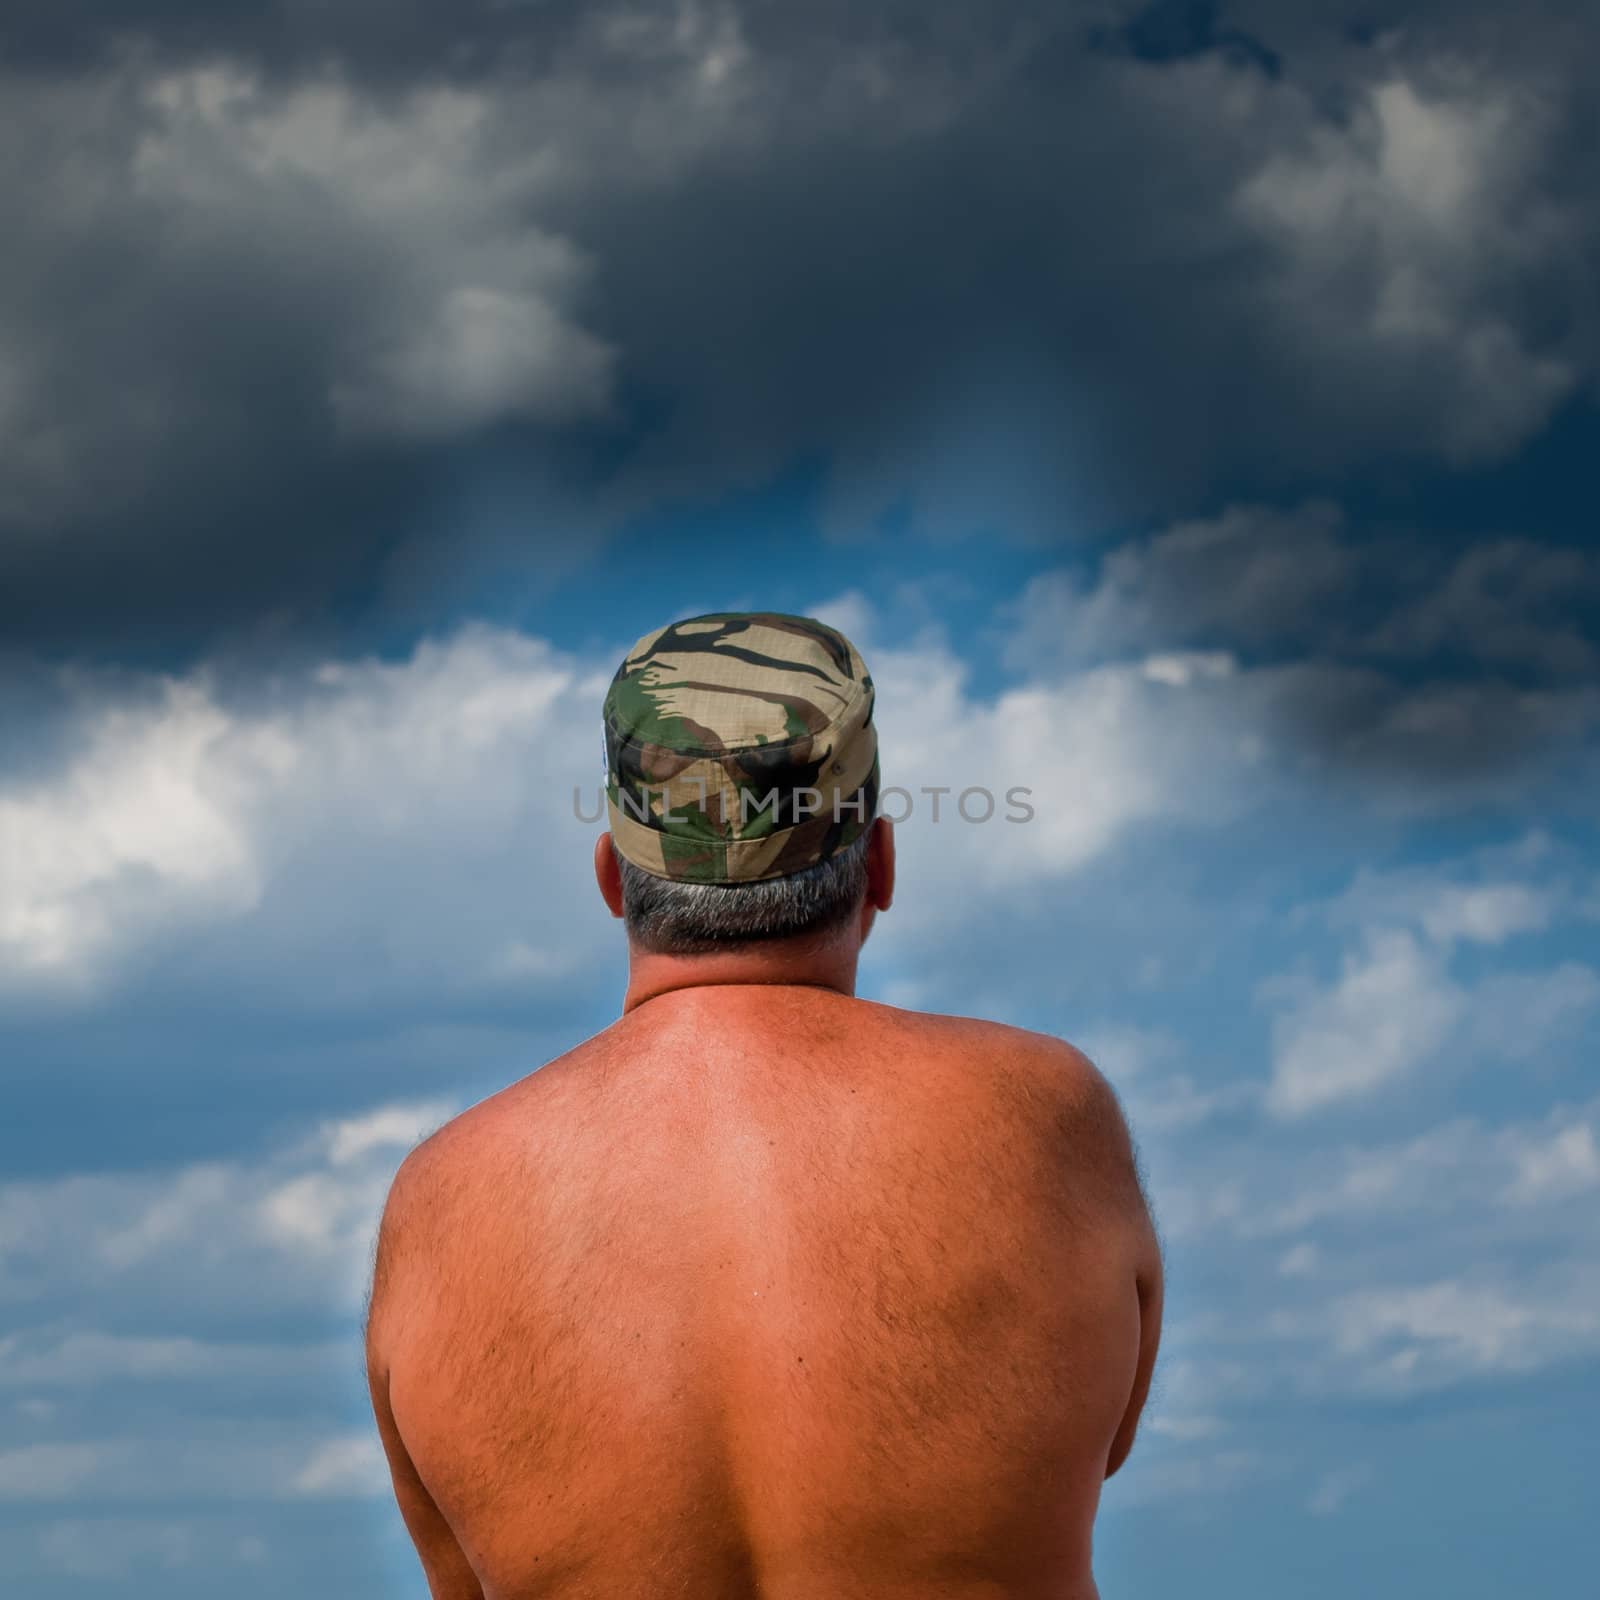 Shirtless army man waiting for the storm to come.